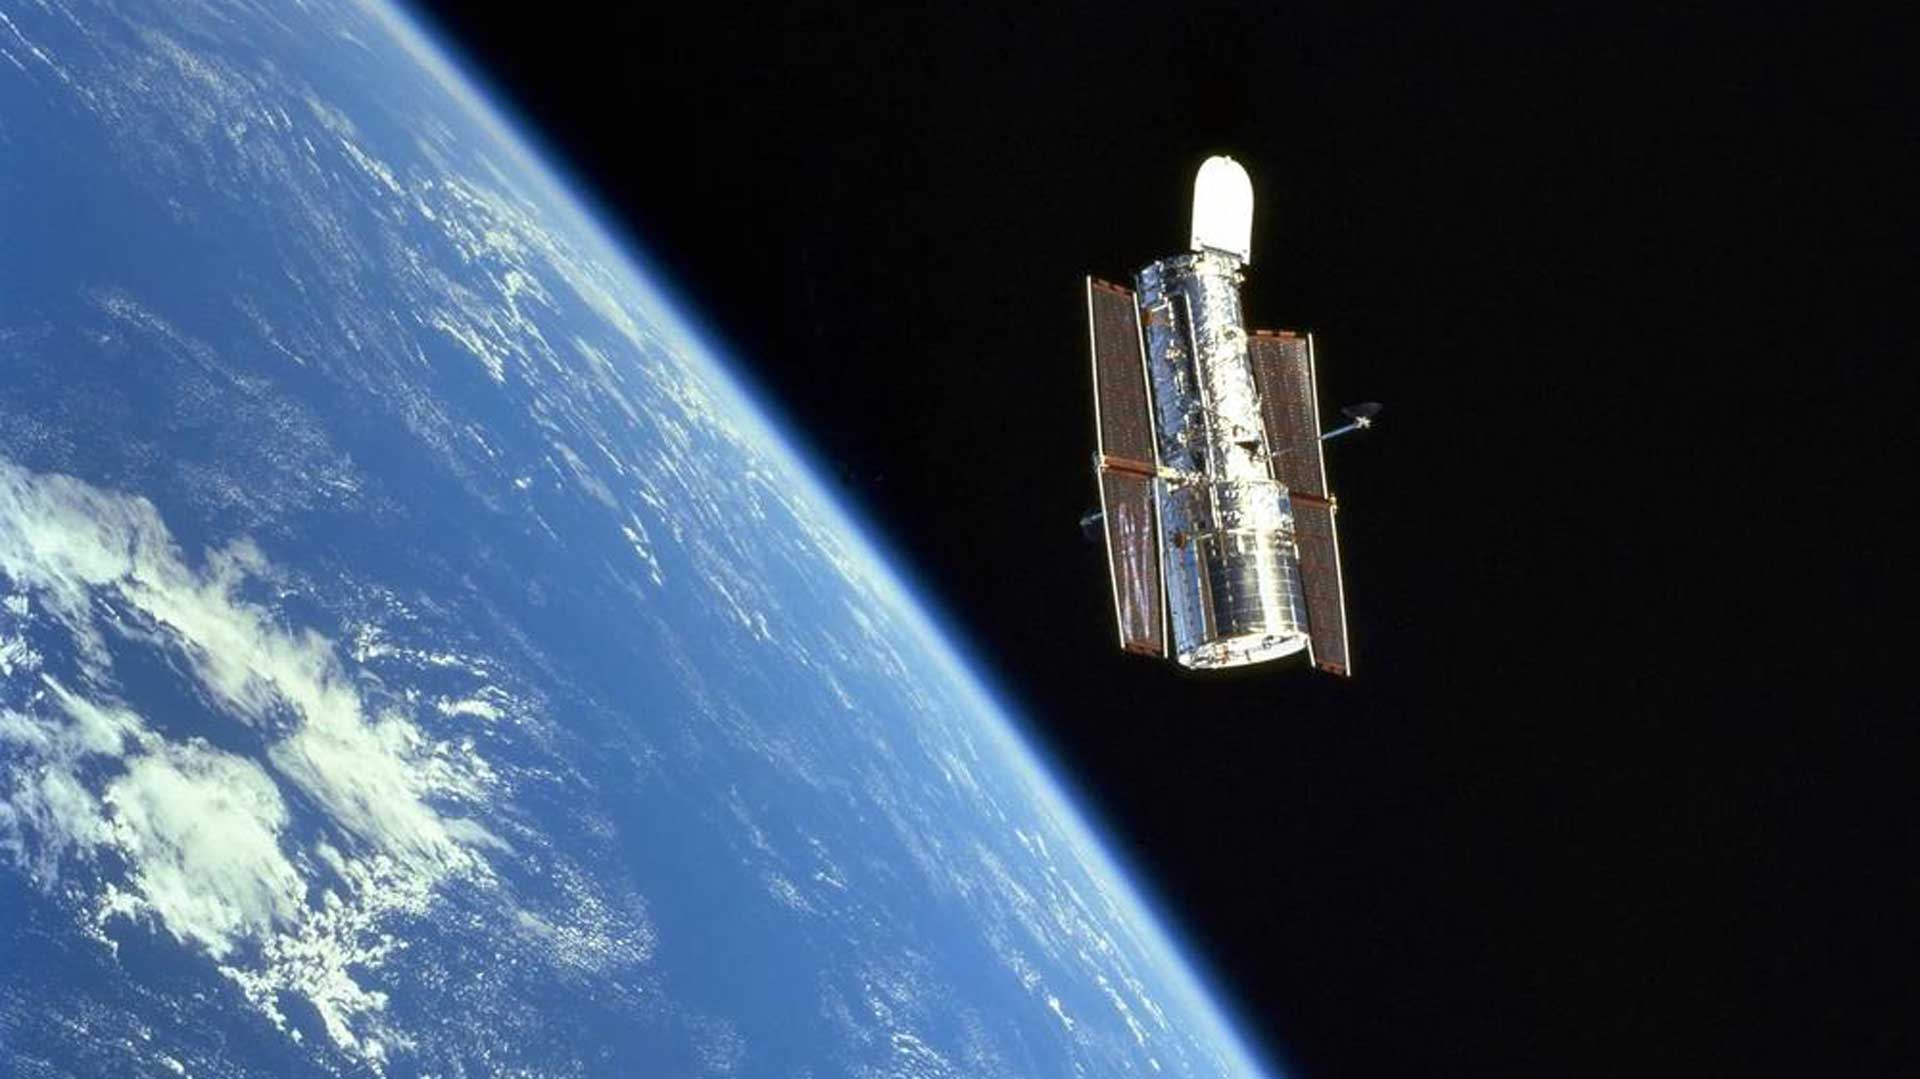 The Hubble Space Telescope in orbit in 1999, just after a servicing mission by astronauts.